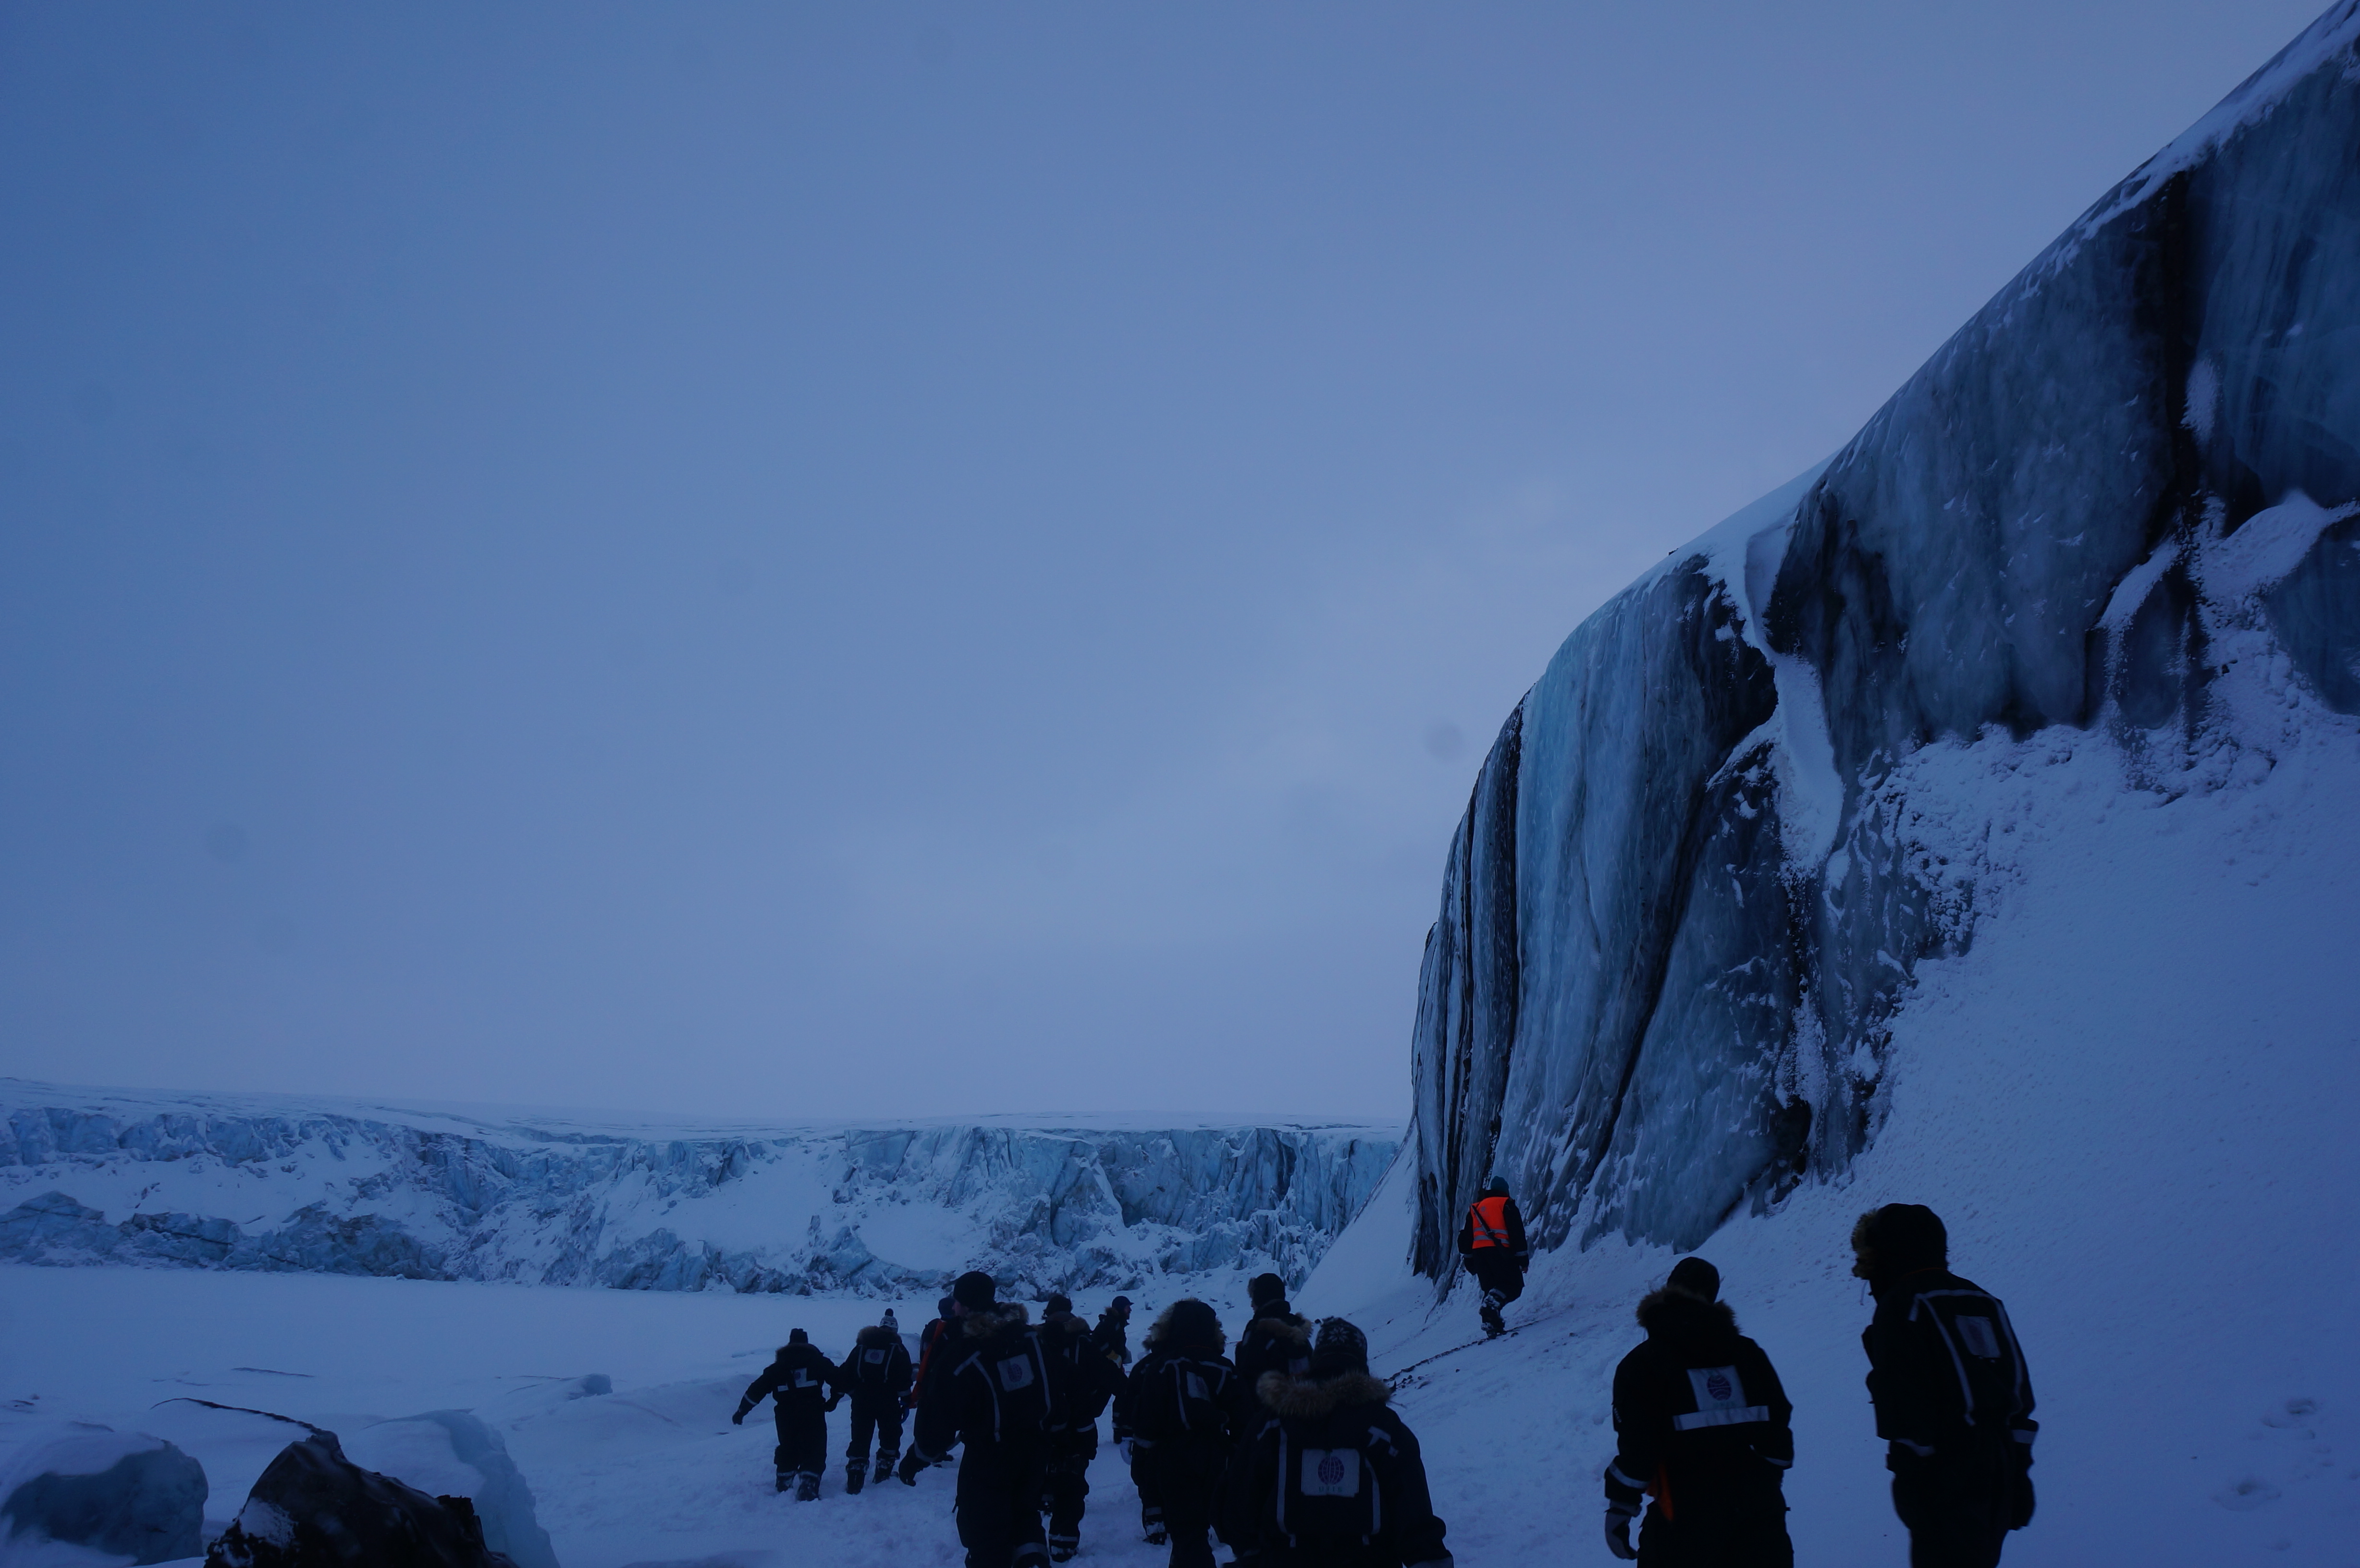 Glaciology students examining the ice exposure at Paulabreen (March 2016)